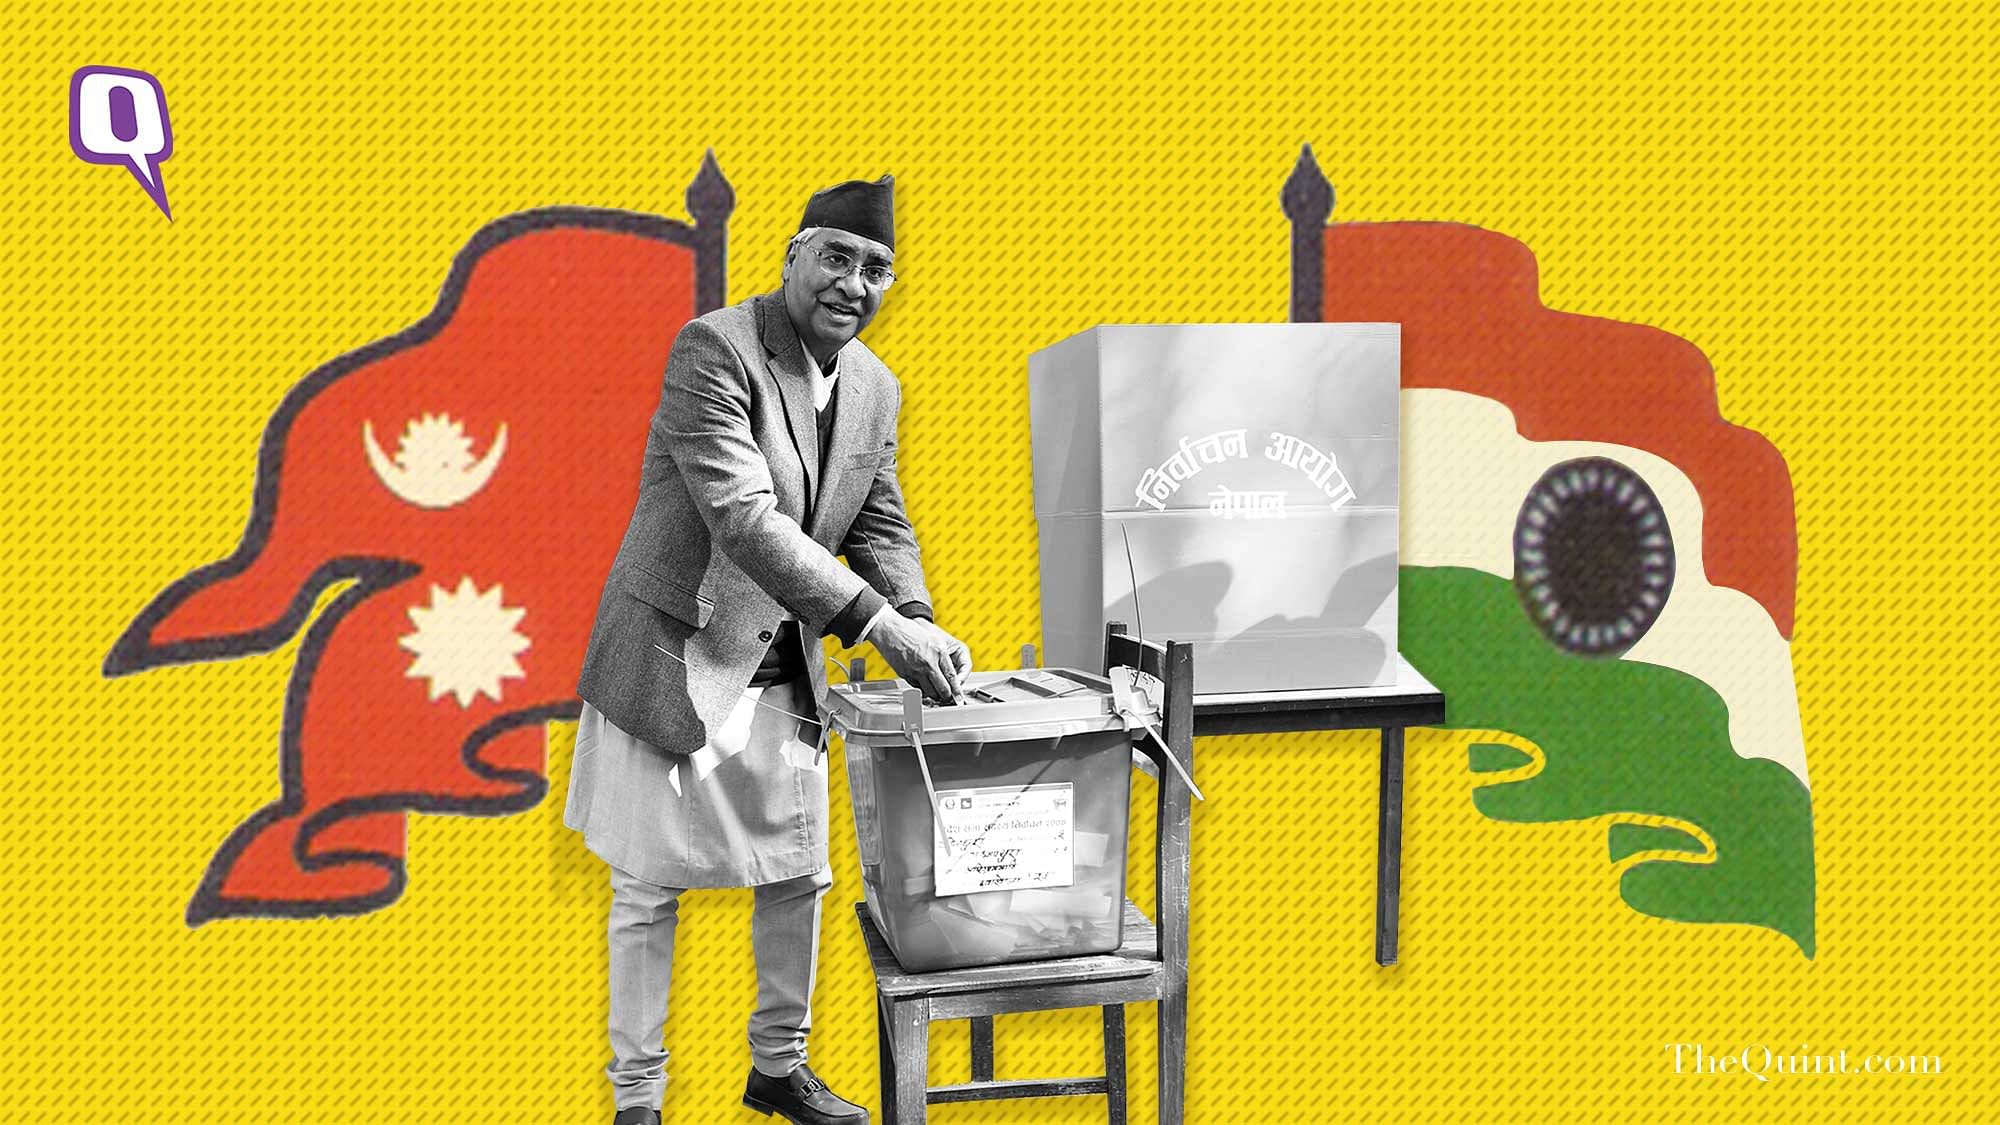 Is Nepali Prime Minister Sher Bahadur Deuba to be blamed for the current political deadlock that is preventing a new government from taking oath?